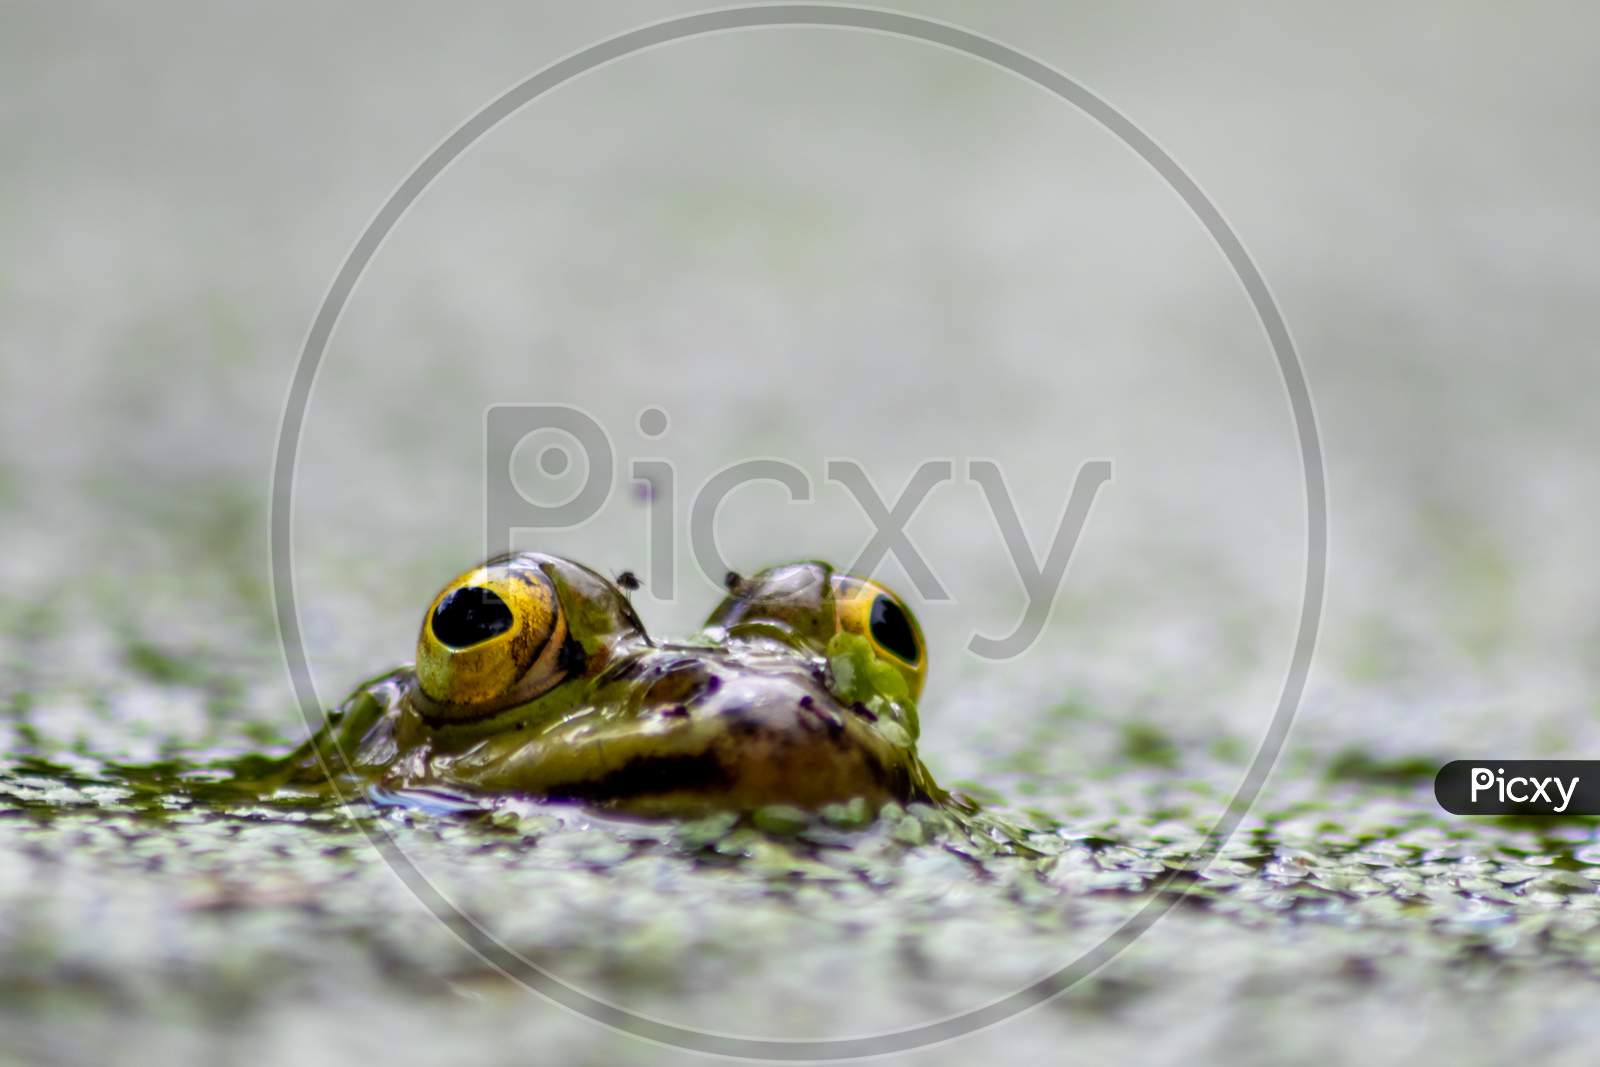 Green european common frog in an idyllic garden pond lurking for insects with big eyes shining and flies around beautiful in the evening sunlight showing its head in the water looking into the camera